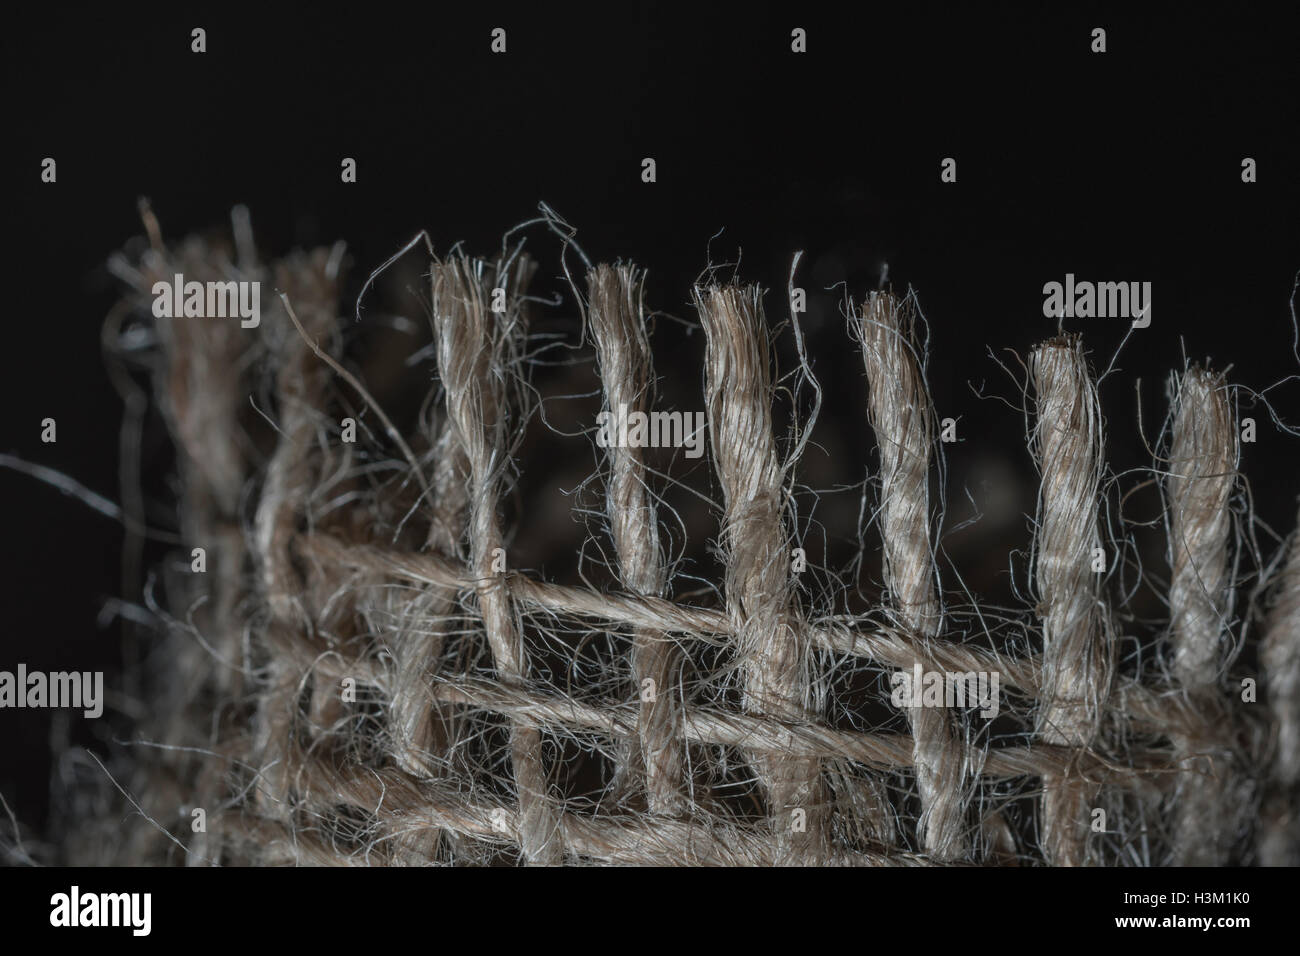 Macro-photo of the fraying edges of natural fibre, jute burlap sacking material showing detail of the fine threads. Stock Photo